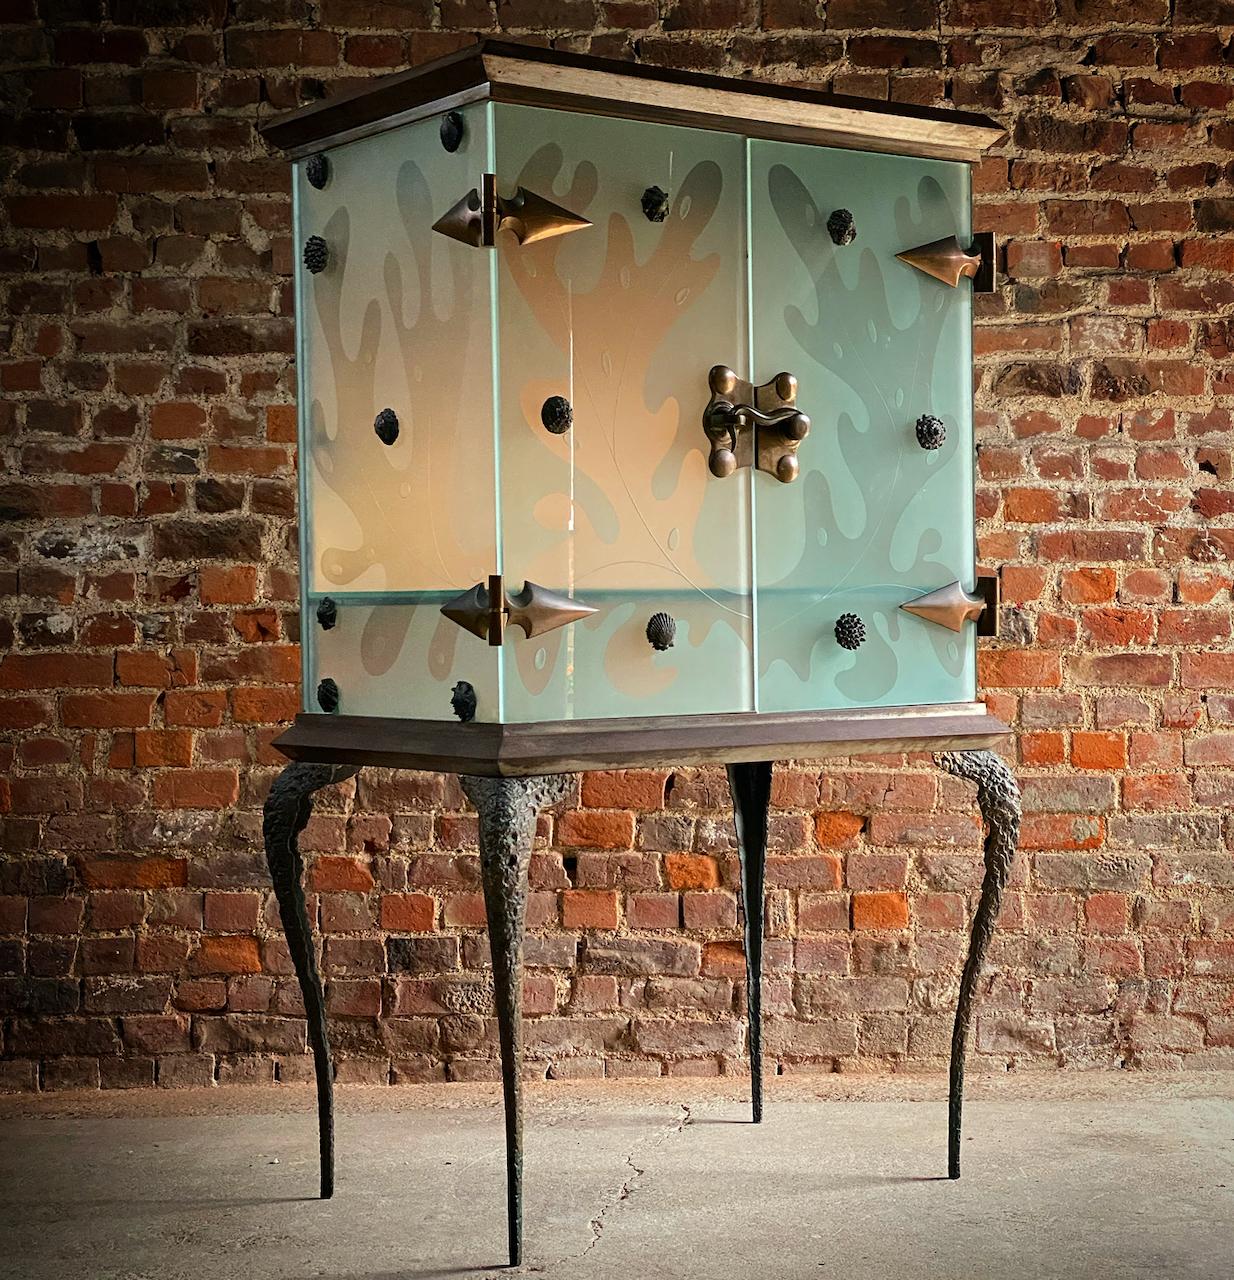 Mark Brazier Jones Zargazo cabinet Circa 1998

'Shaken, not Stirred', sublime rare and uniquely worthy of the great man himself, outrageous audacious ridonculous ‘Furniture Art’ by way of the master craftsman that is Mr Mark Brazier-Jones the